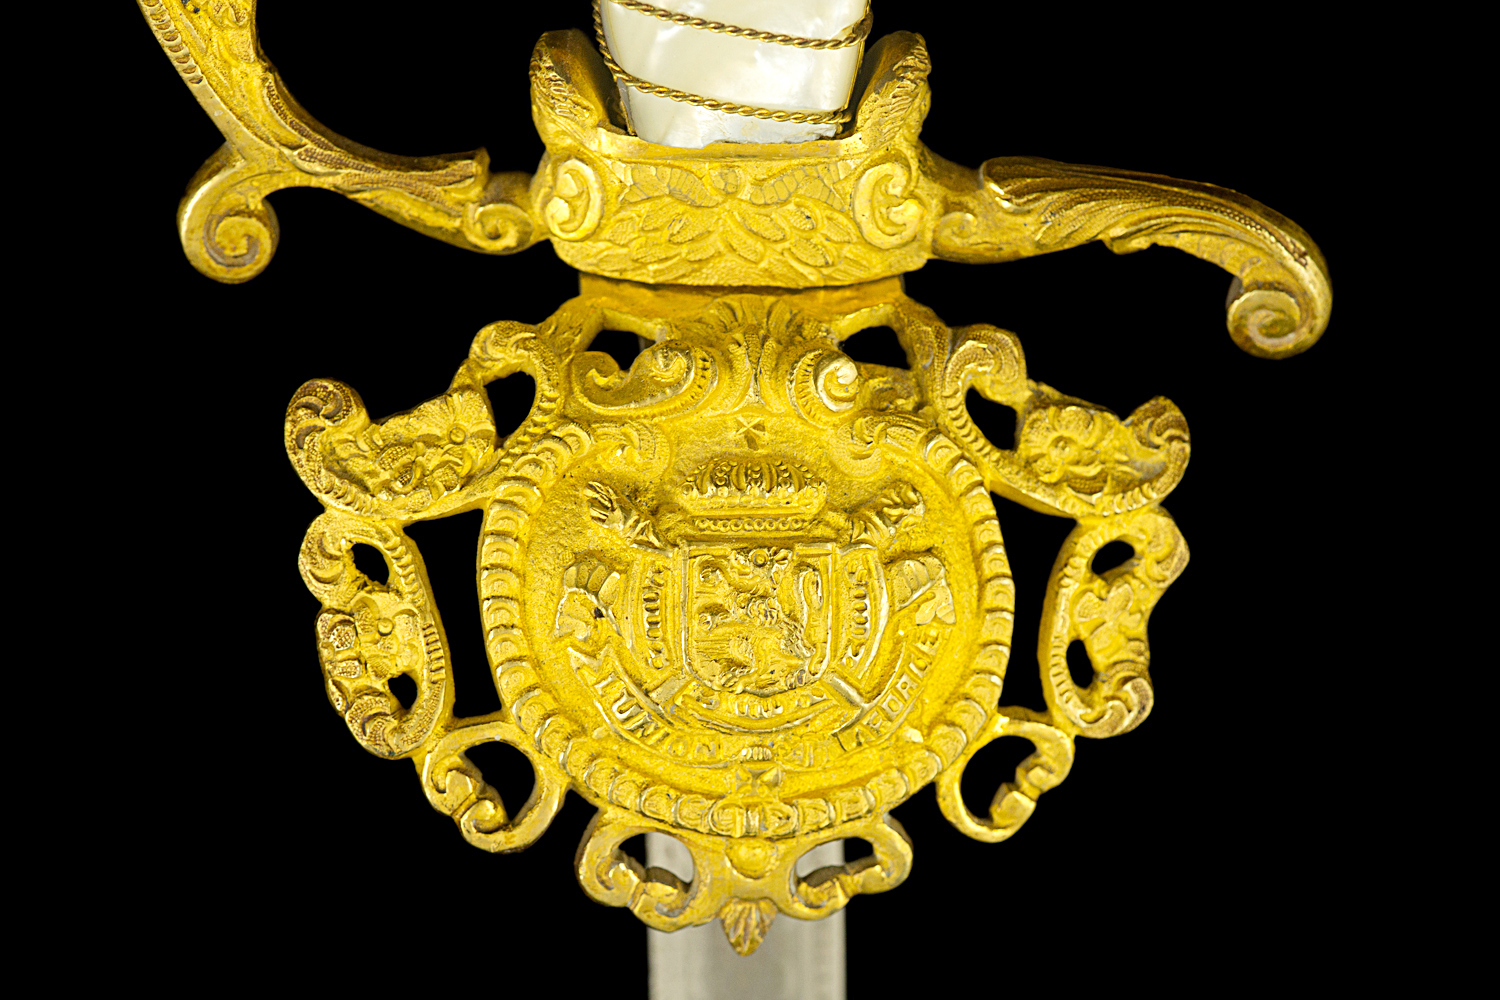 S000084_Belgian_Wired_Grip_Court_Sword_Detail_Shell_Obverse